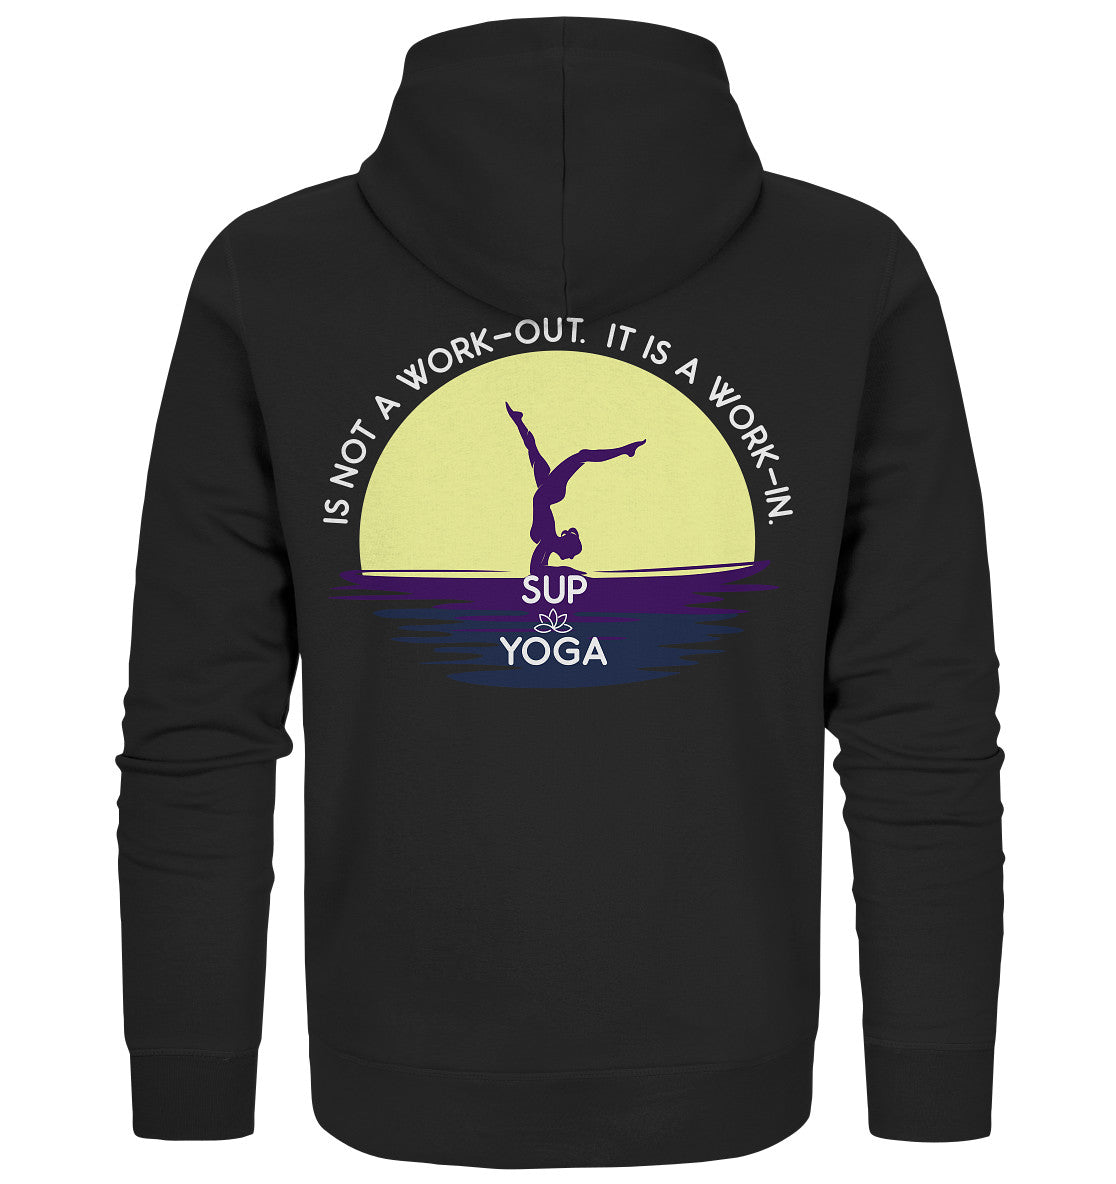 SUP YOGA IS NOT A WORK-OUT.  IT IS A WORK-IN.  - Organic Zipper